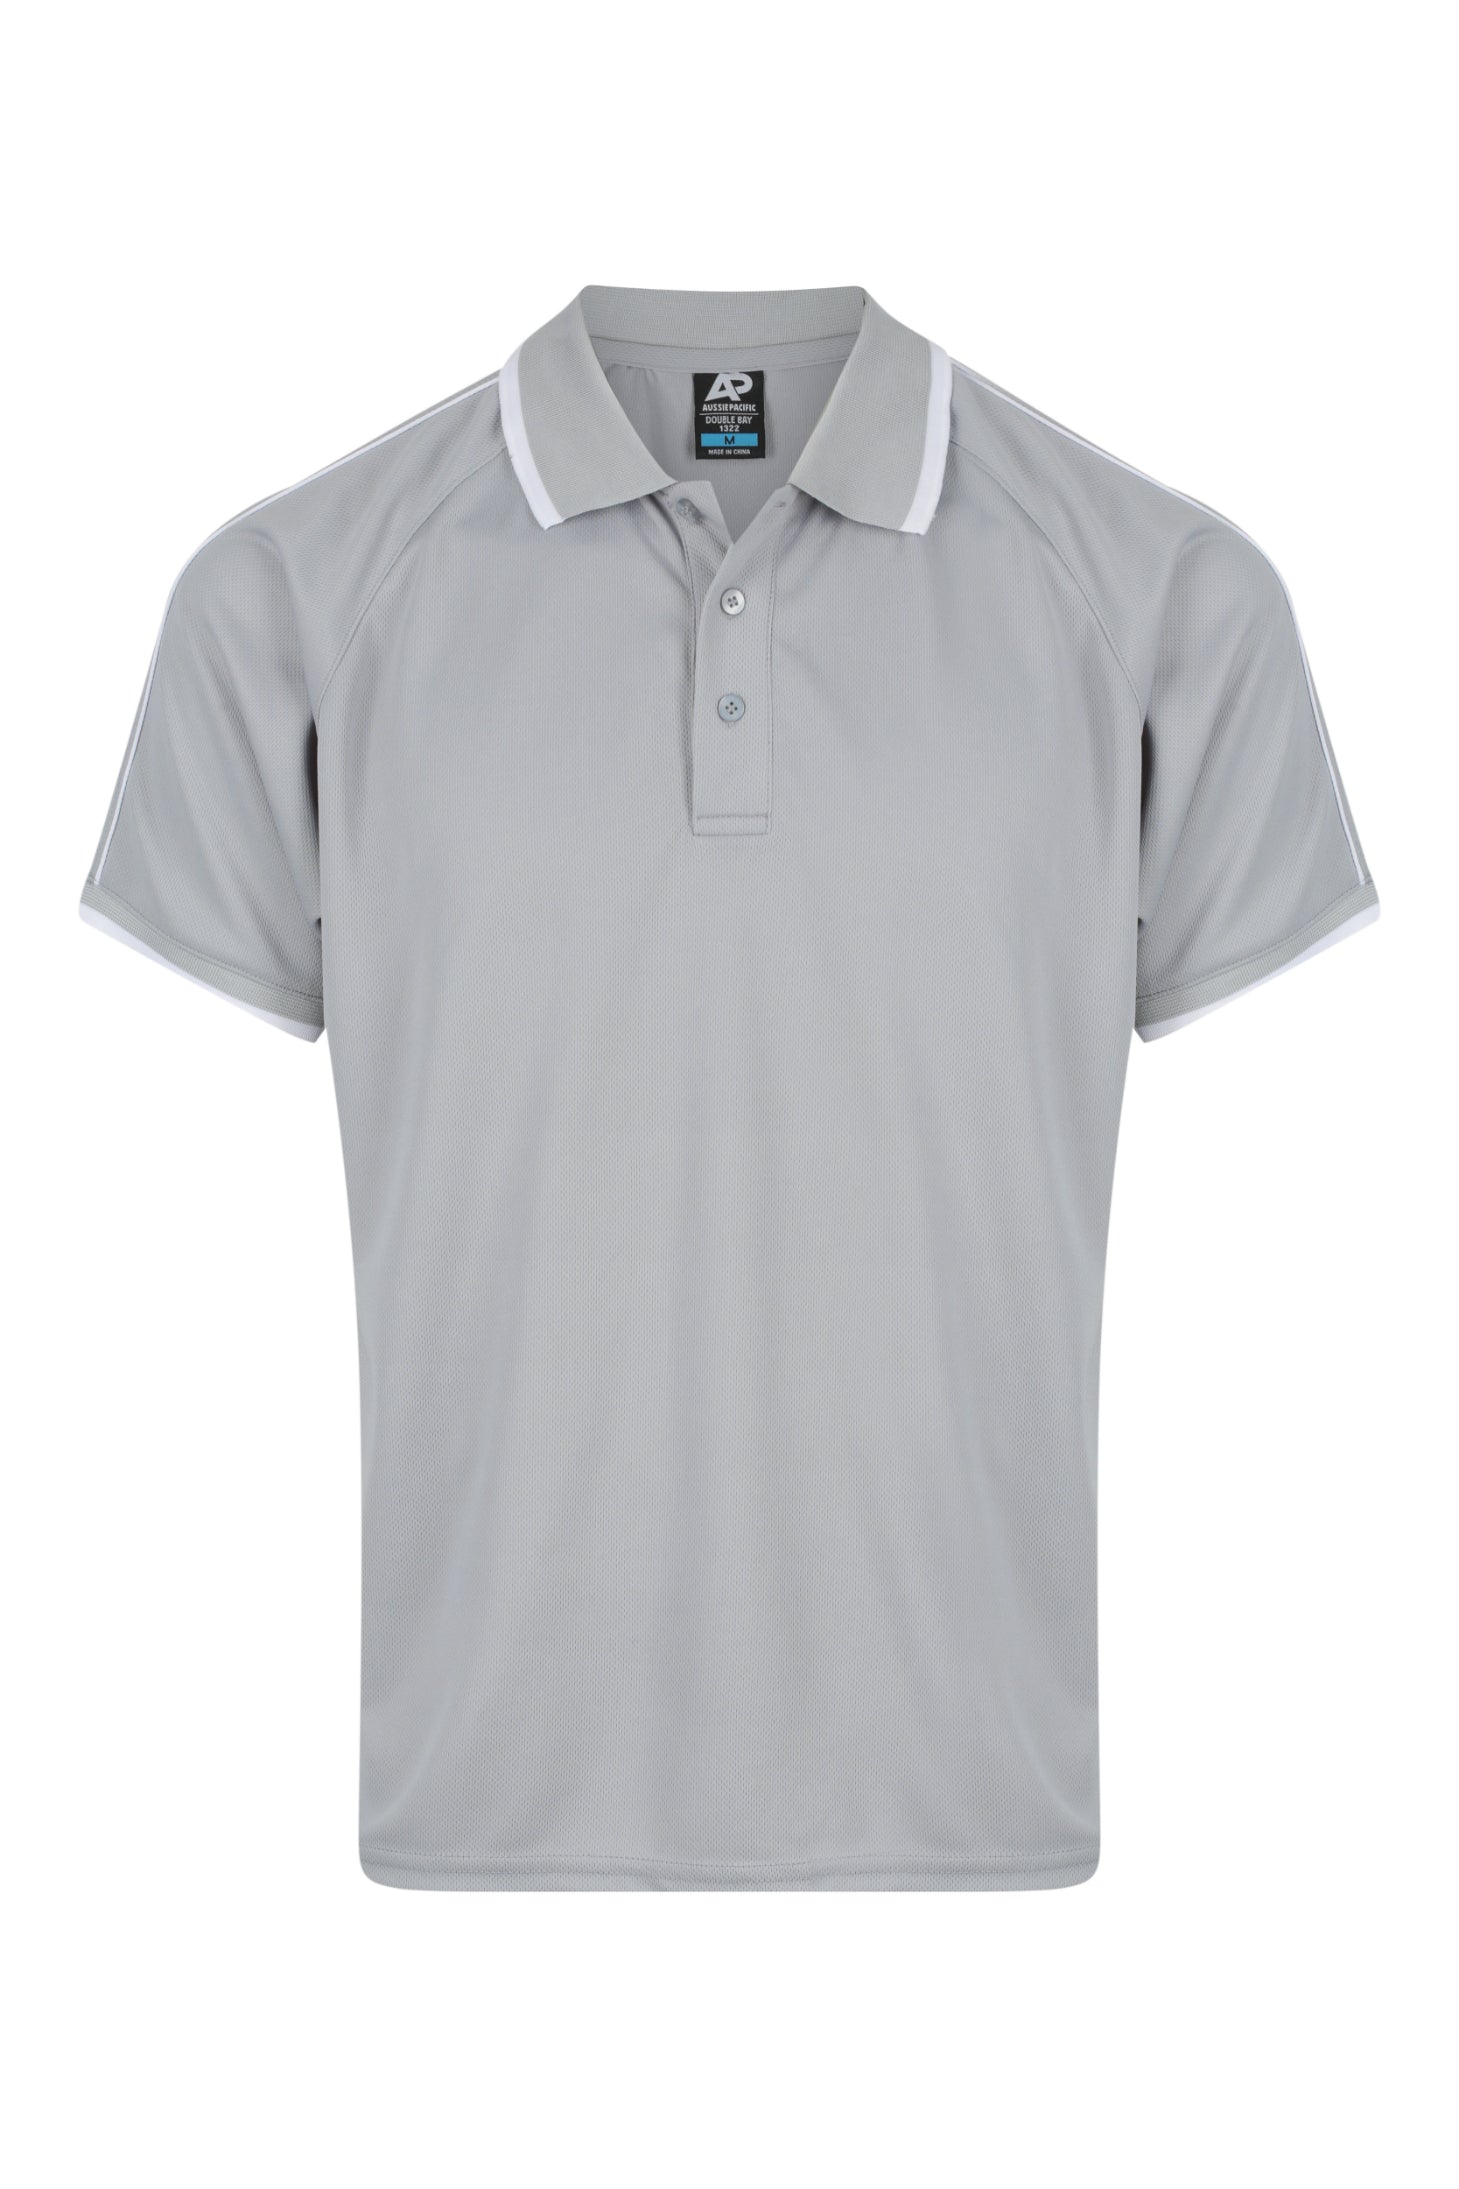 DOUBLE BAY MENS POLOS - 1322-Aussie Pacific-9